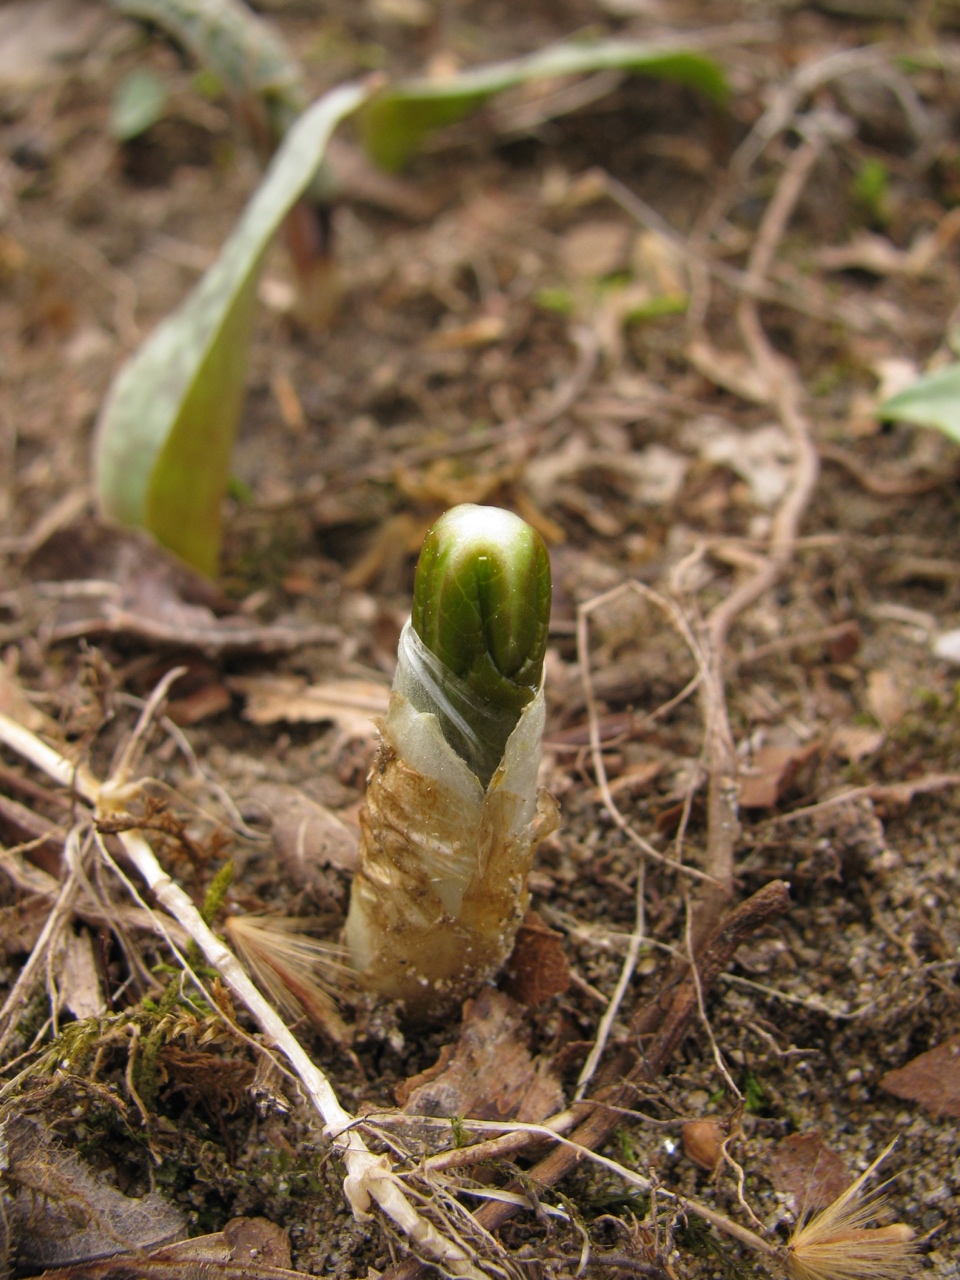 The Scientific Name is Podophyllum peltatum. You will likely hear them called Mayapple, May-apple, American Mandrake, Wild Mandrake, Indian Apple, Pomme de Mai, Podophylle Pelt. This picture shows the Just beginning to emerge in March of Podophyllum peltatum